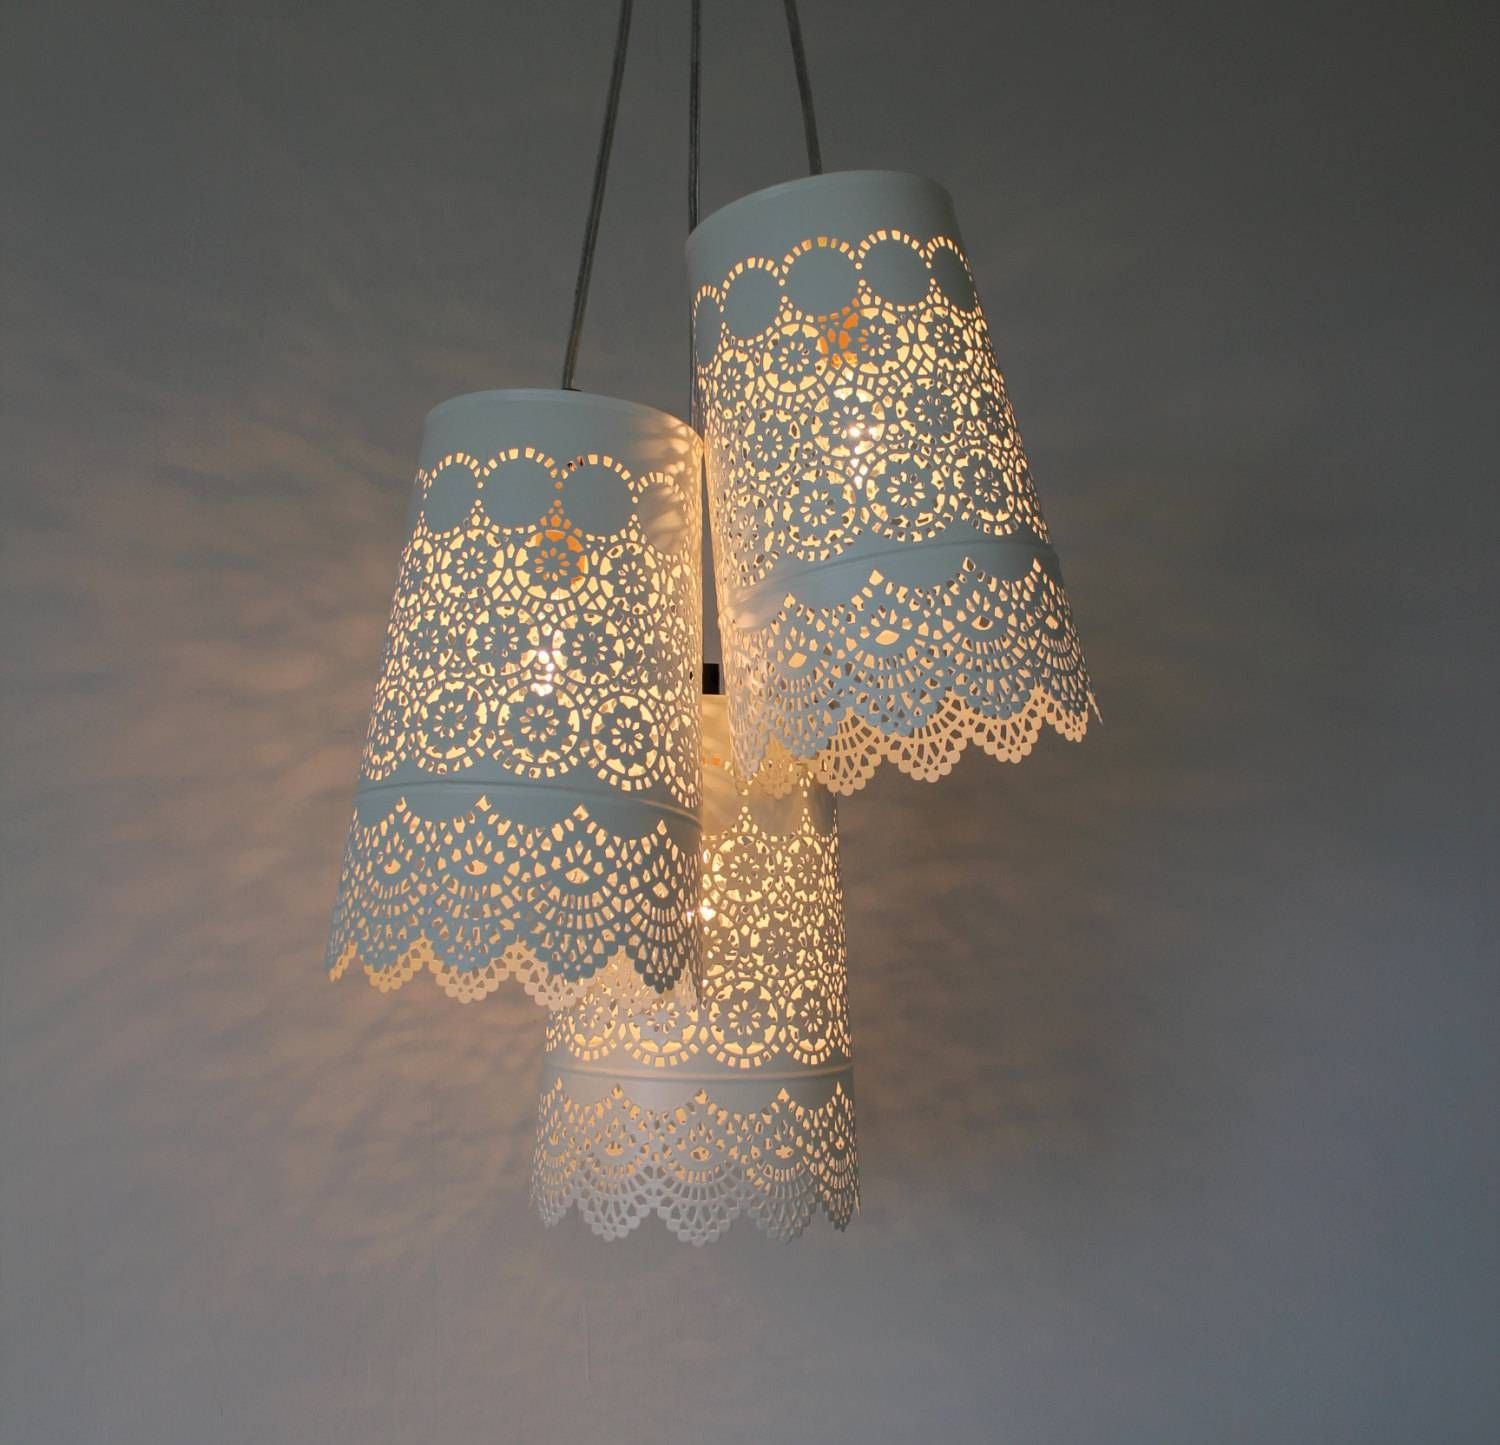 Trend Clip On Lamp Shades For Ceiling Light 87 For Your Punched With Regard To Punched Tin Pendant Lights (View 7 of 15)